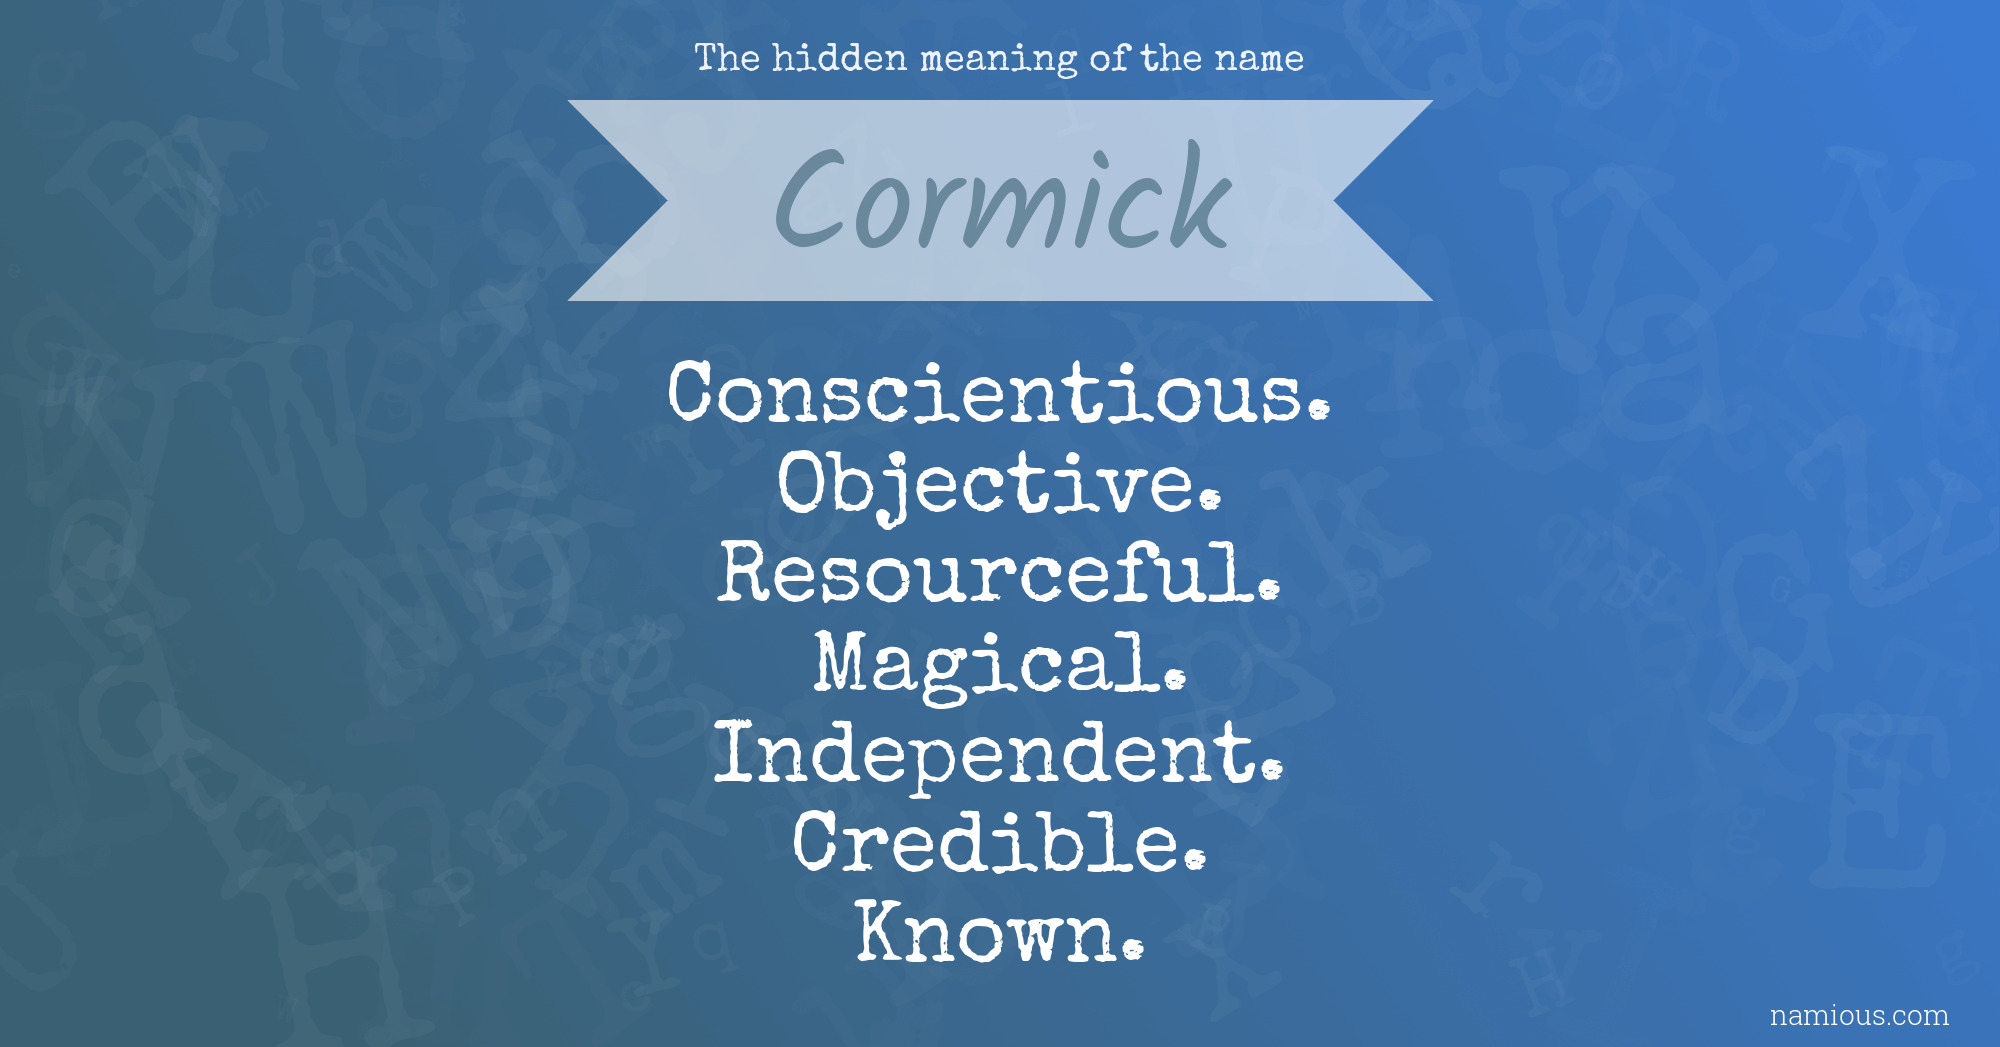 The hidden meaning of the name Cormick